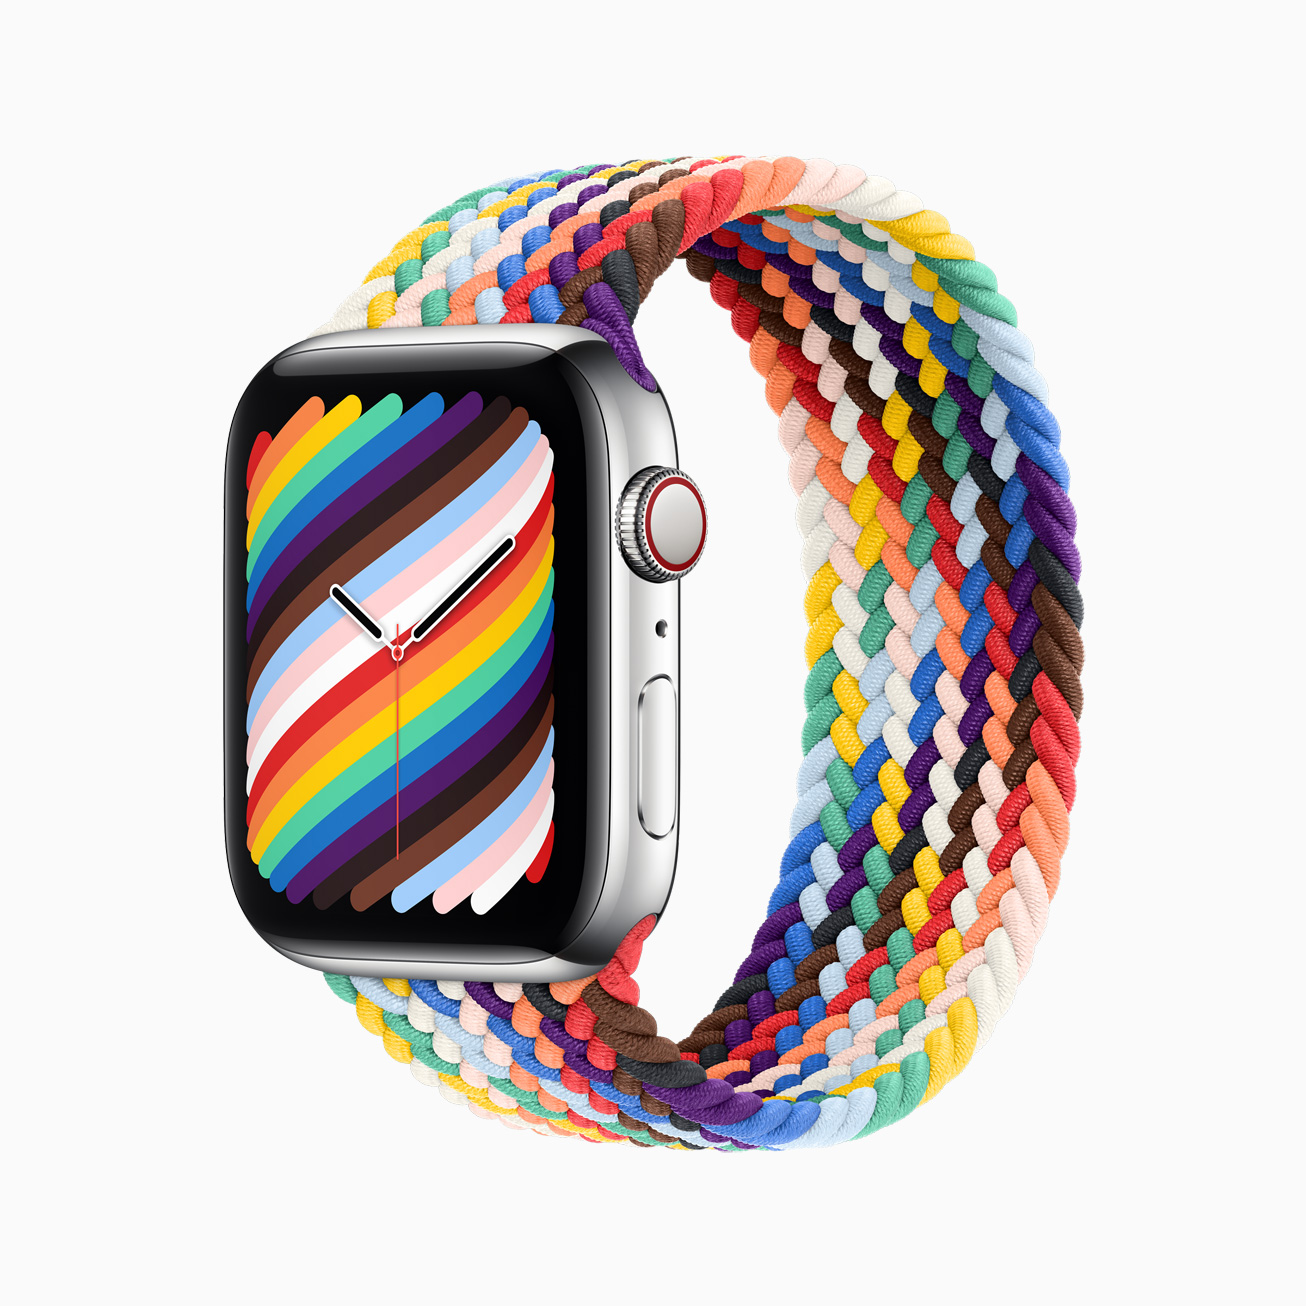 Apple Watch Pride Edition bands celebrate the diverse LGBTQ+ movement